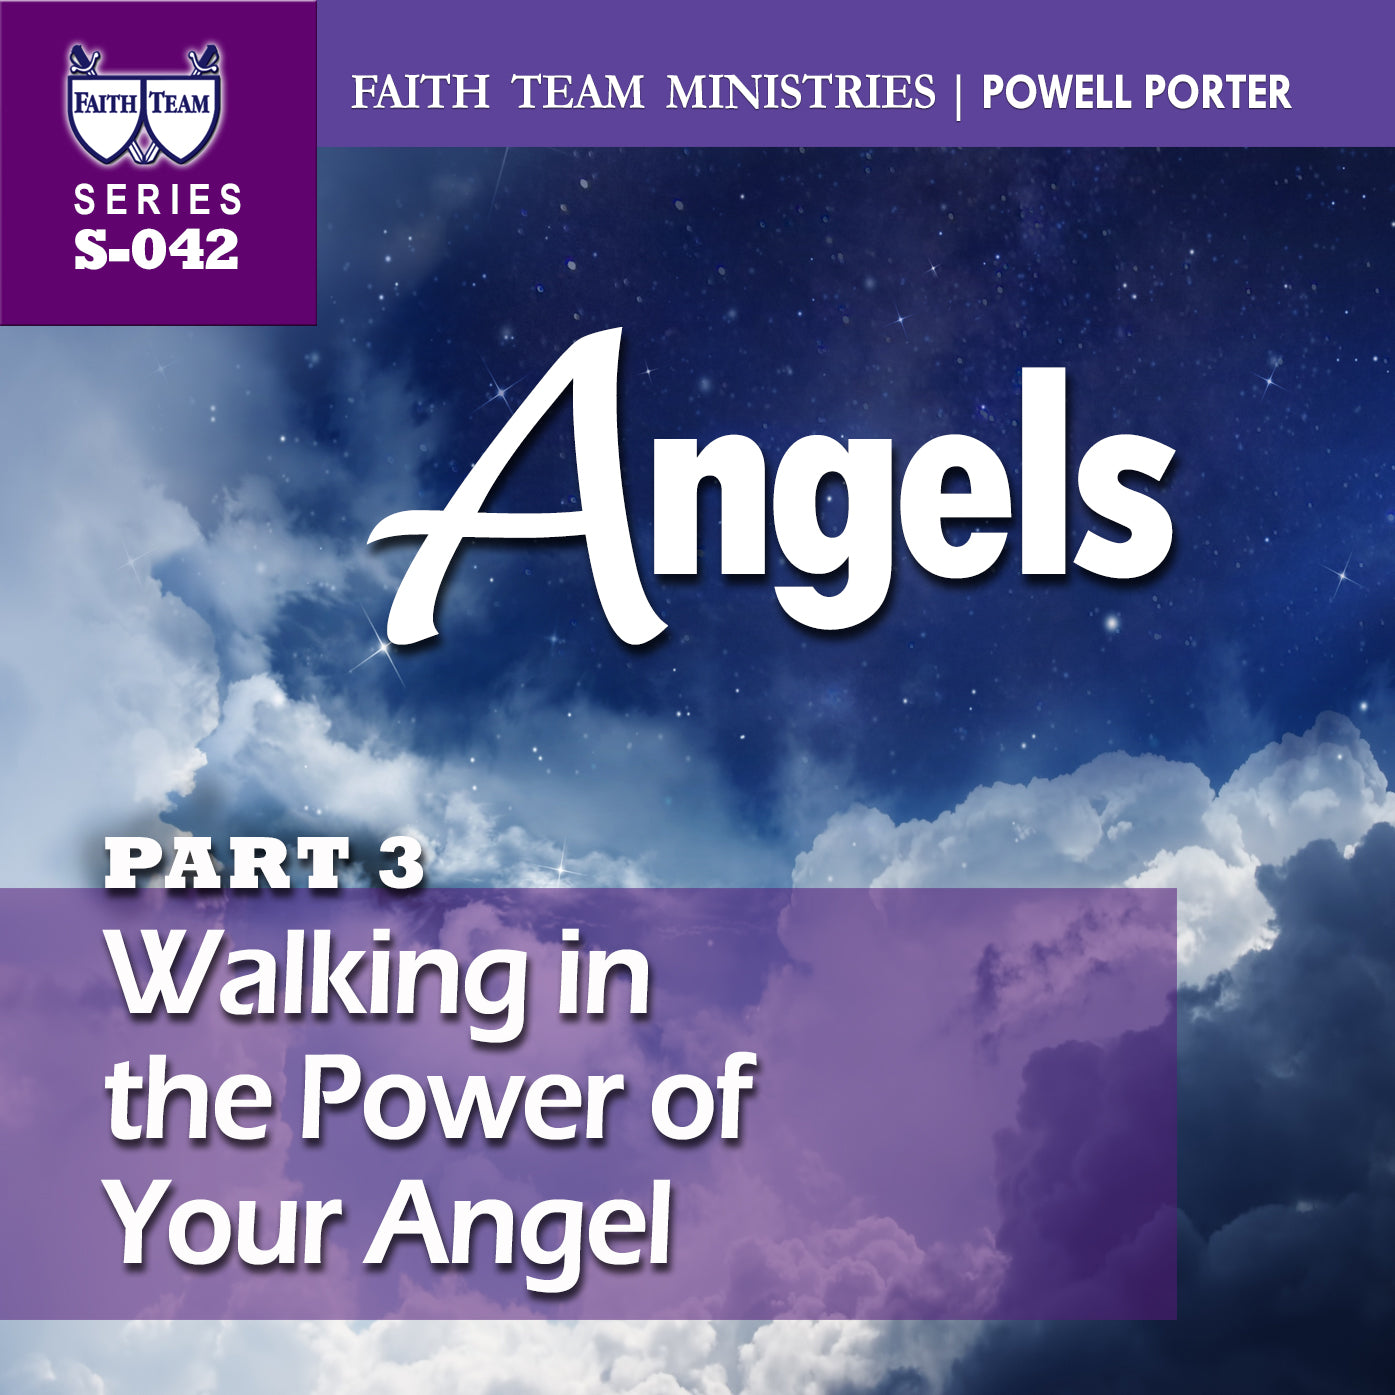 ANGELS | Part 3: Walking in the Power of Your Angel